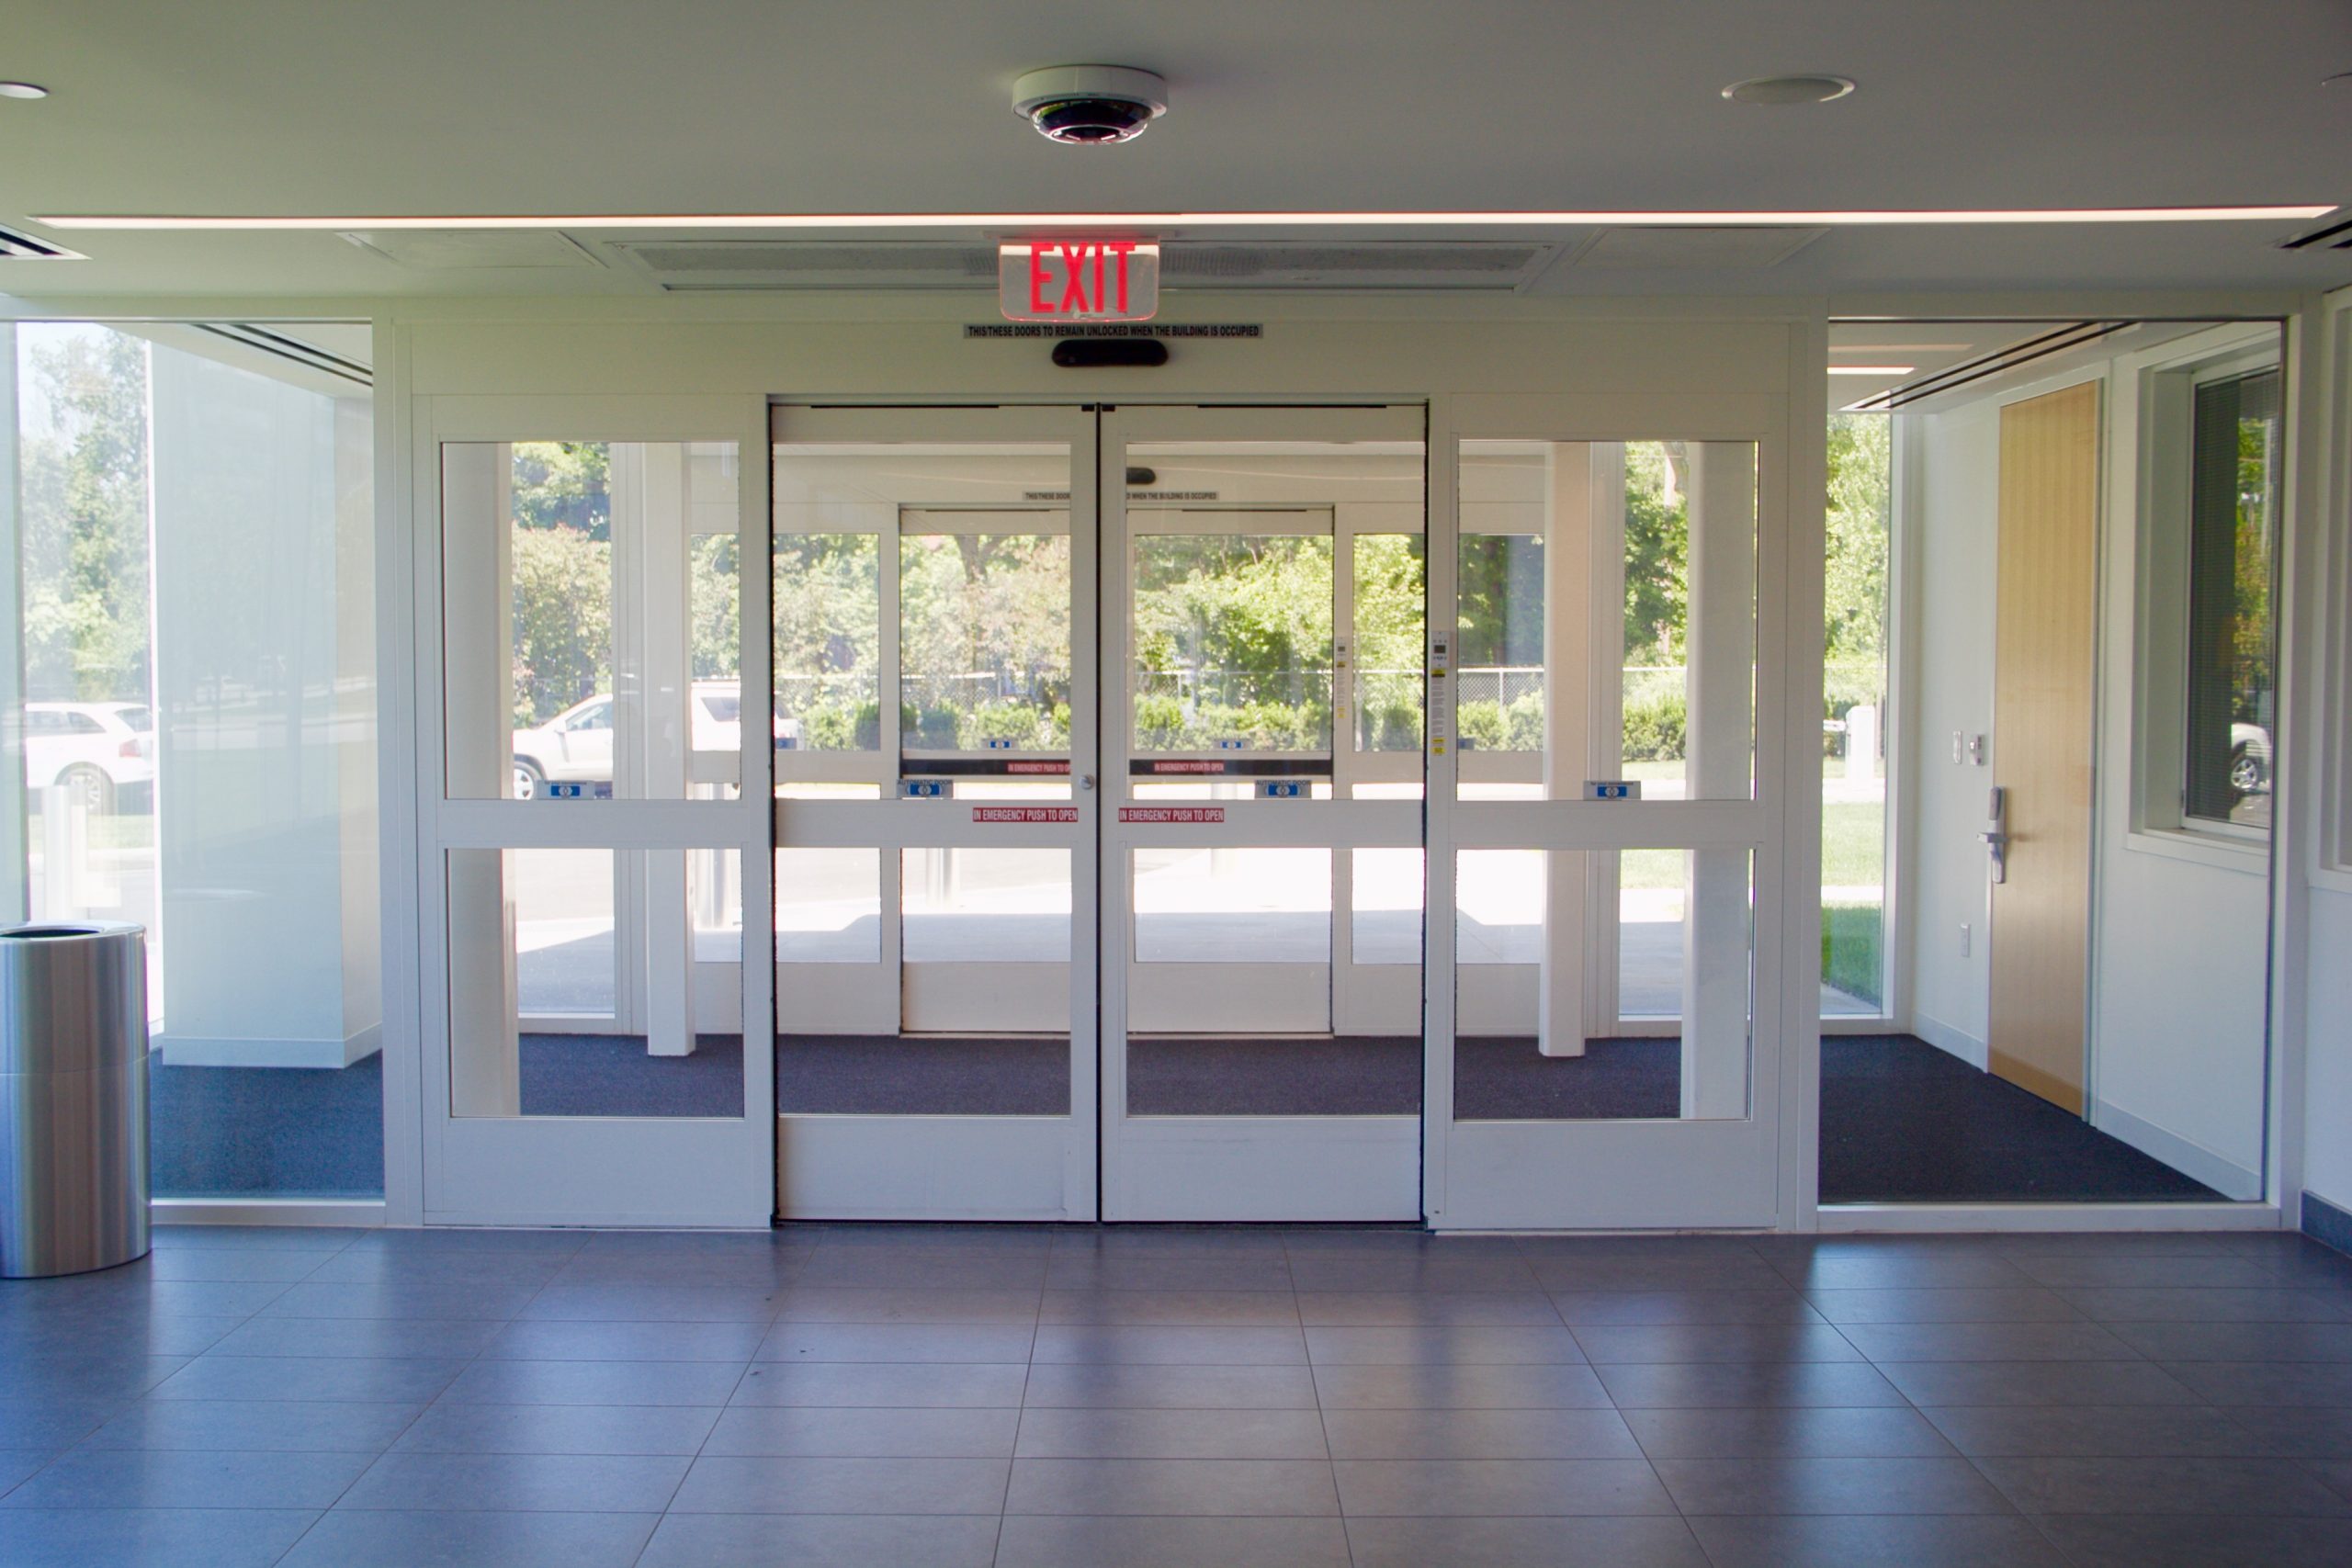 Photo of an interior automatic sliding door at a university